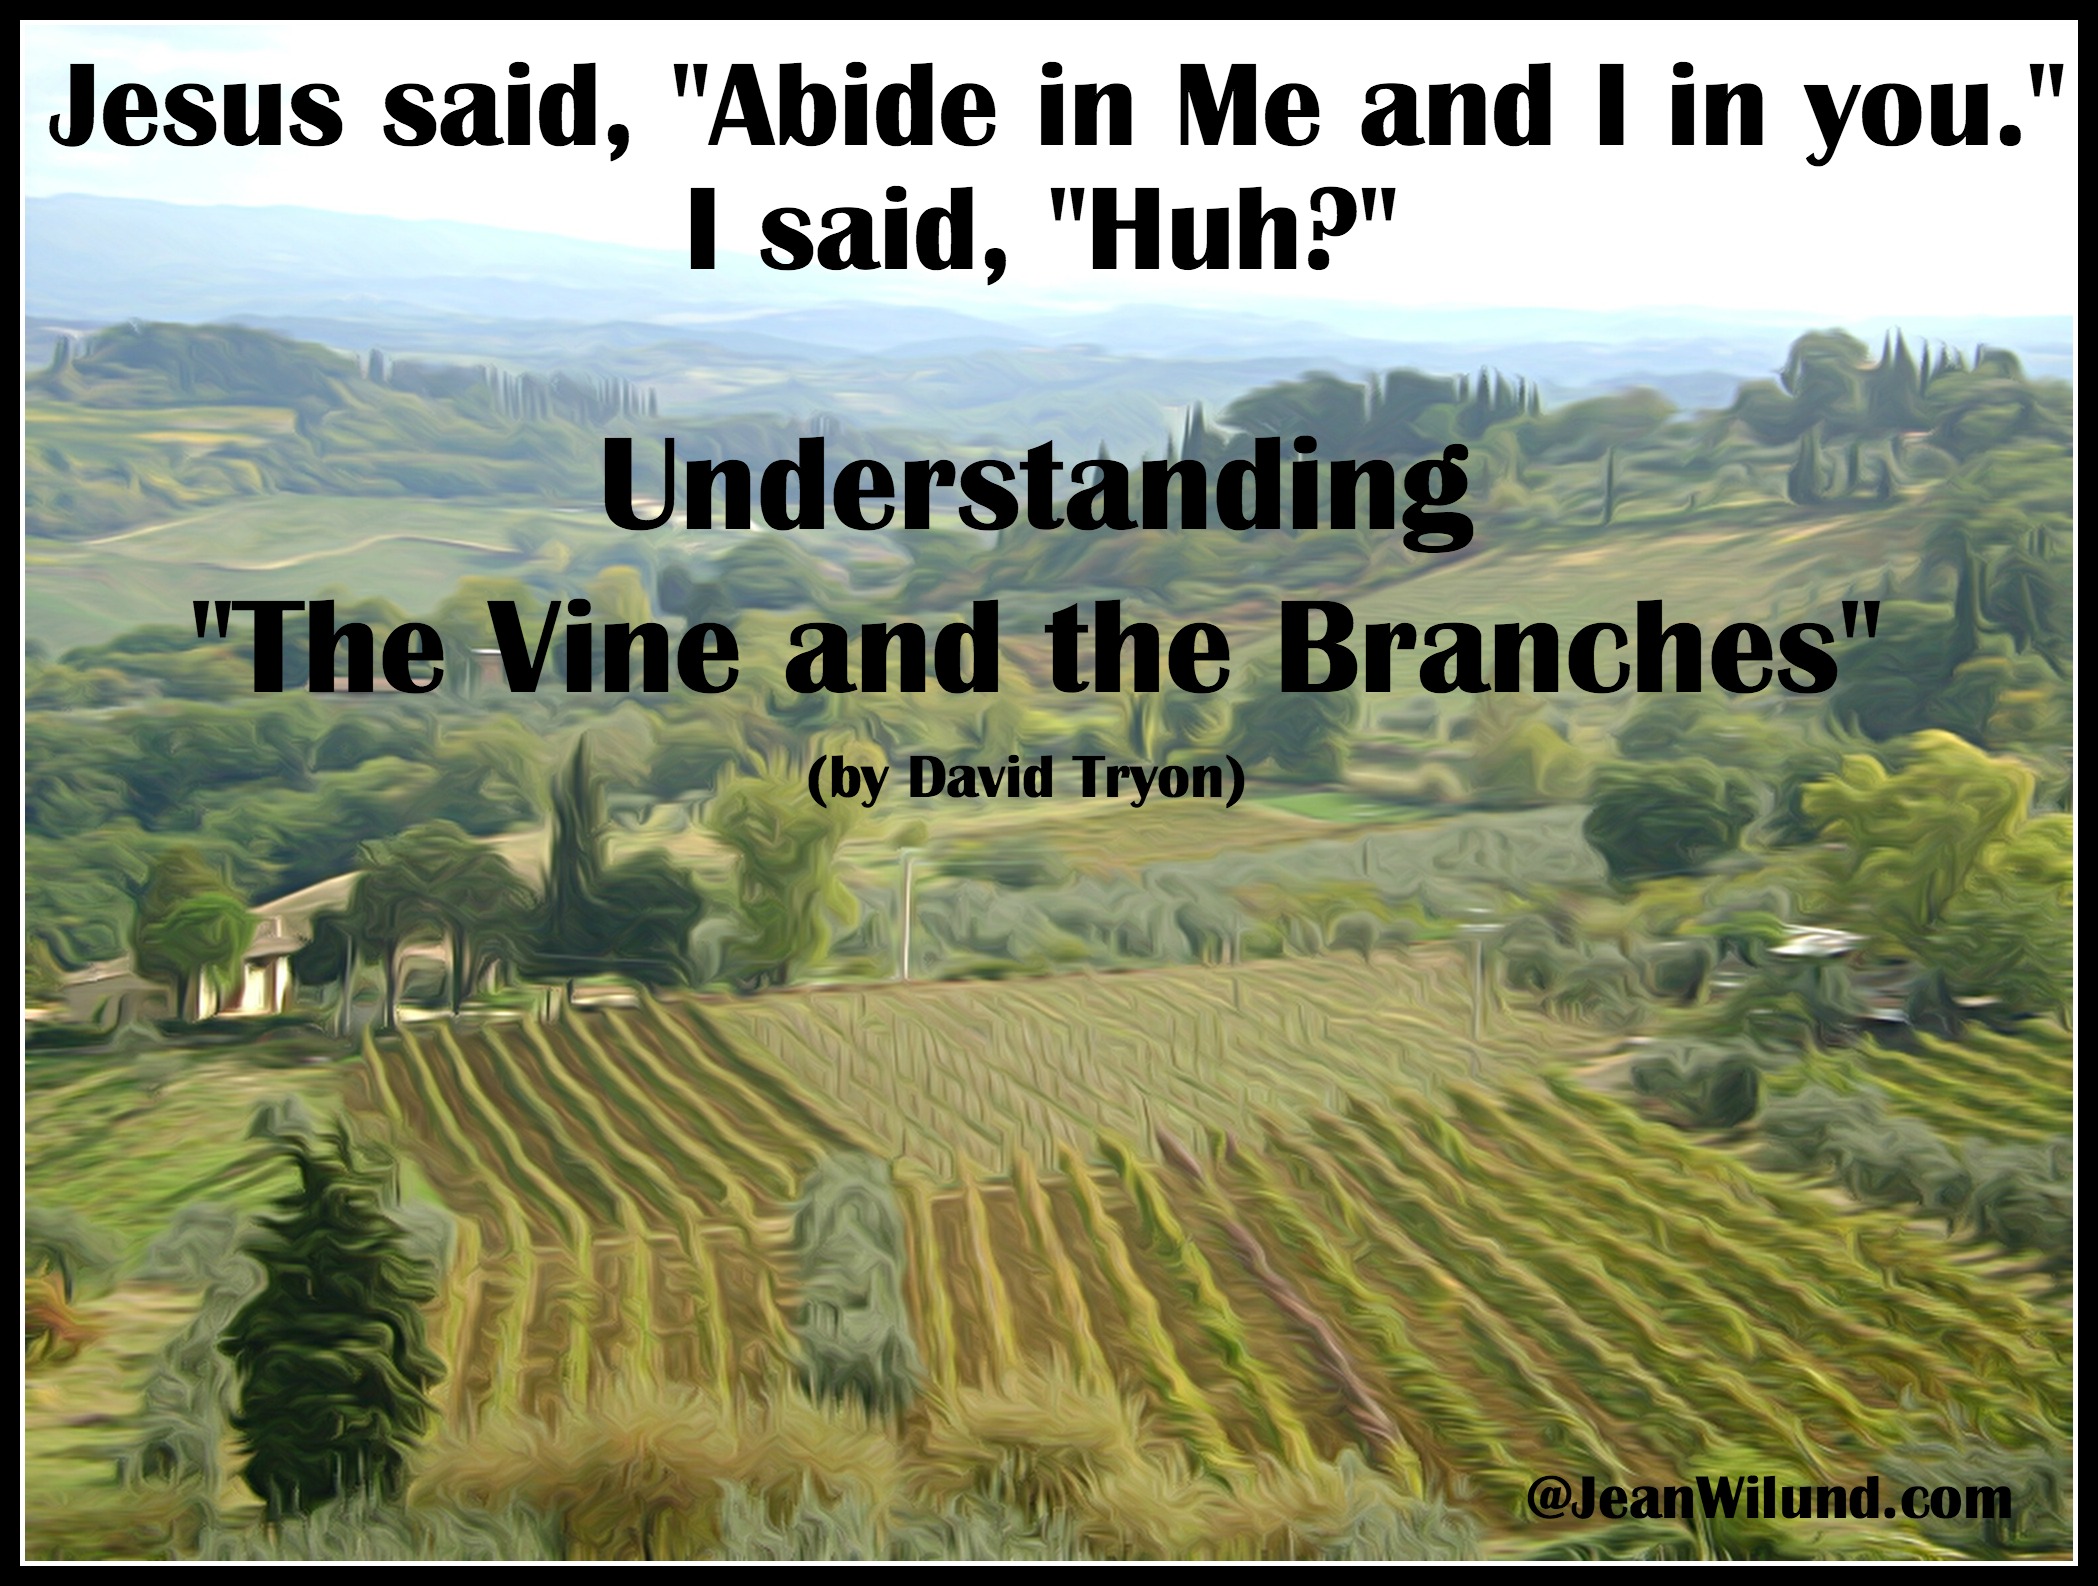 If you've ever wanted to understand Jesus' parable of the Vine and the Branches, you've found the right place. David Tryon explains it well. (www.JeanWilund.com)